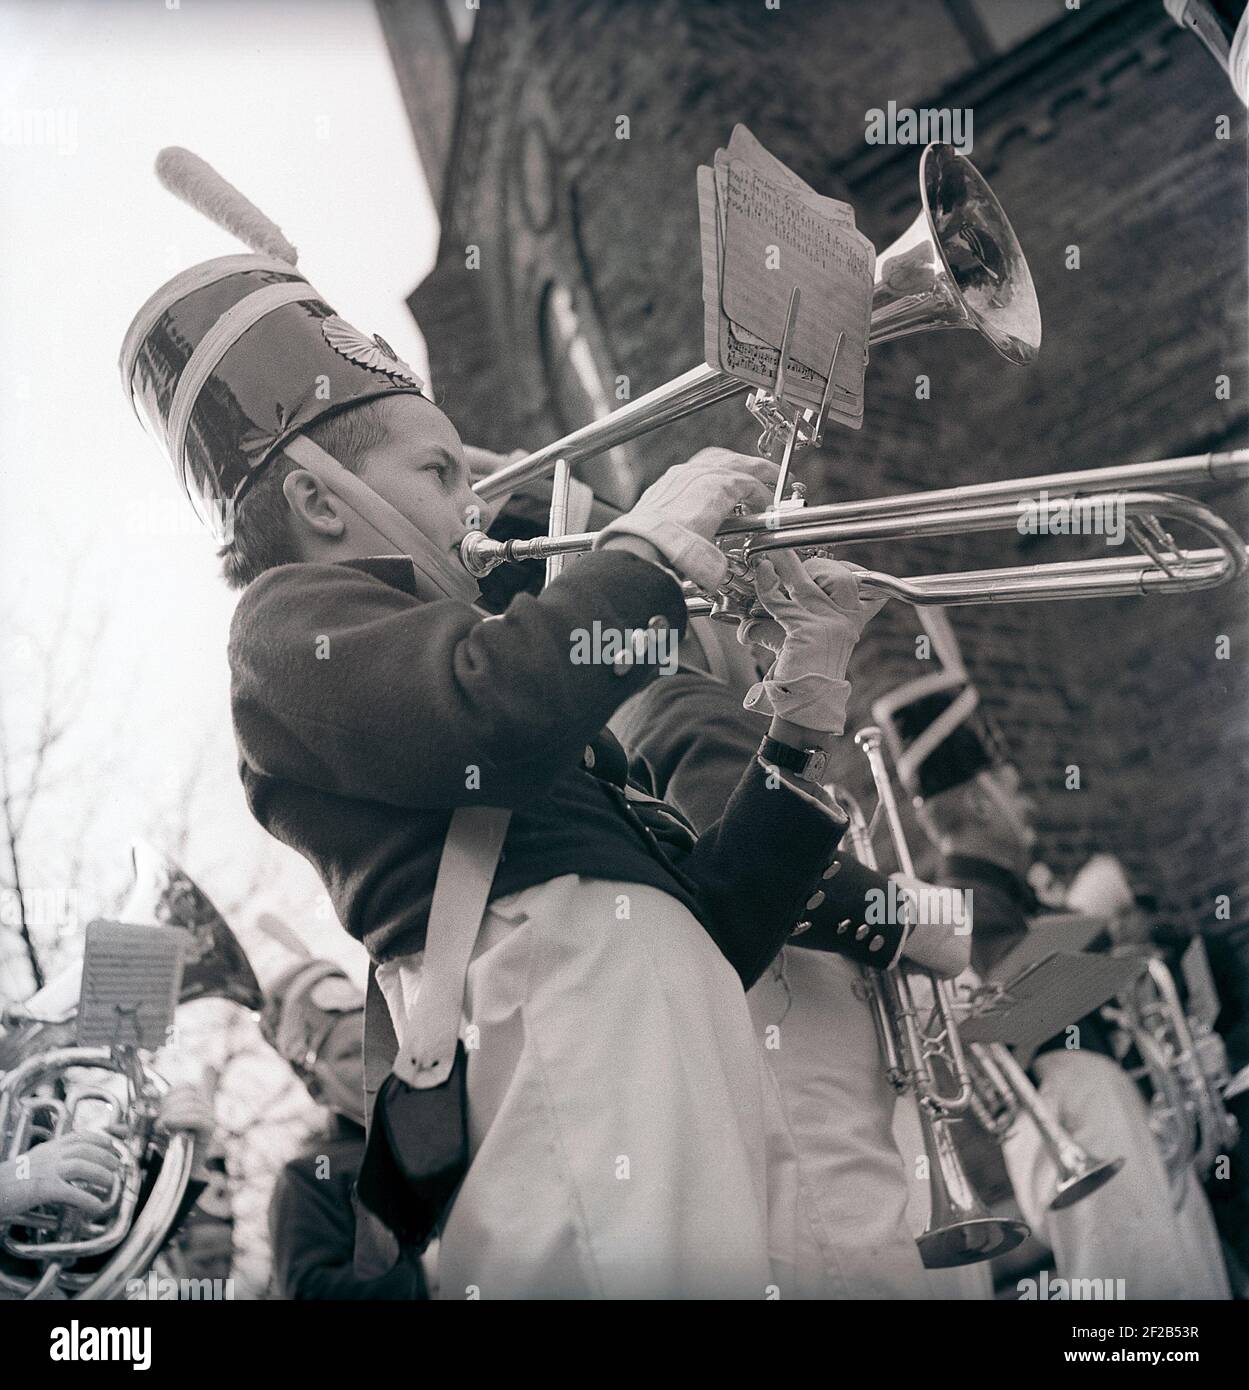 Boy orchestra in the 1940s. Lars Nilsson of Skansens childrens orchestra is parading on may 5 1940. He plays the trombone. Sweden ref 121-18 Stock Photo